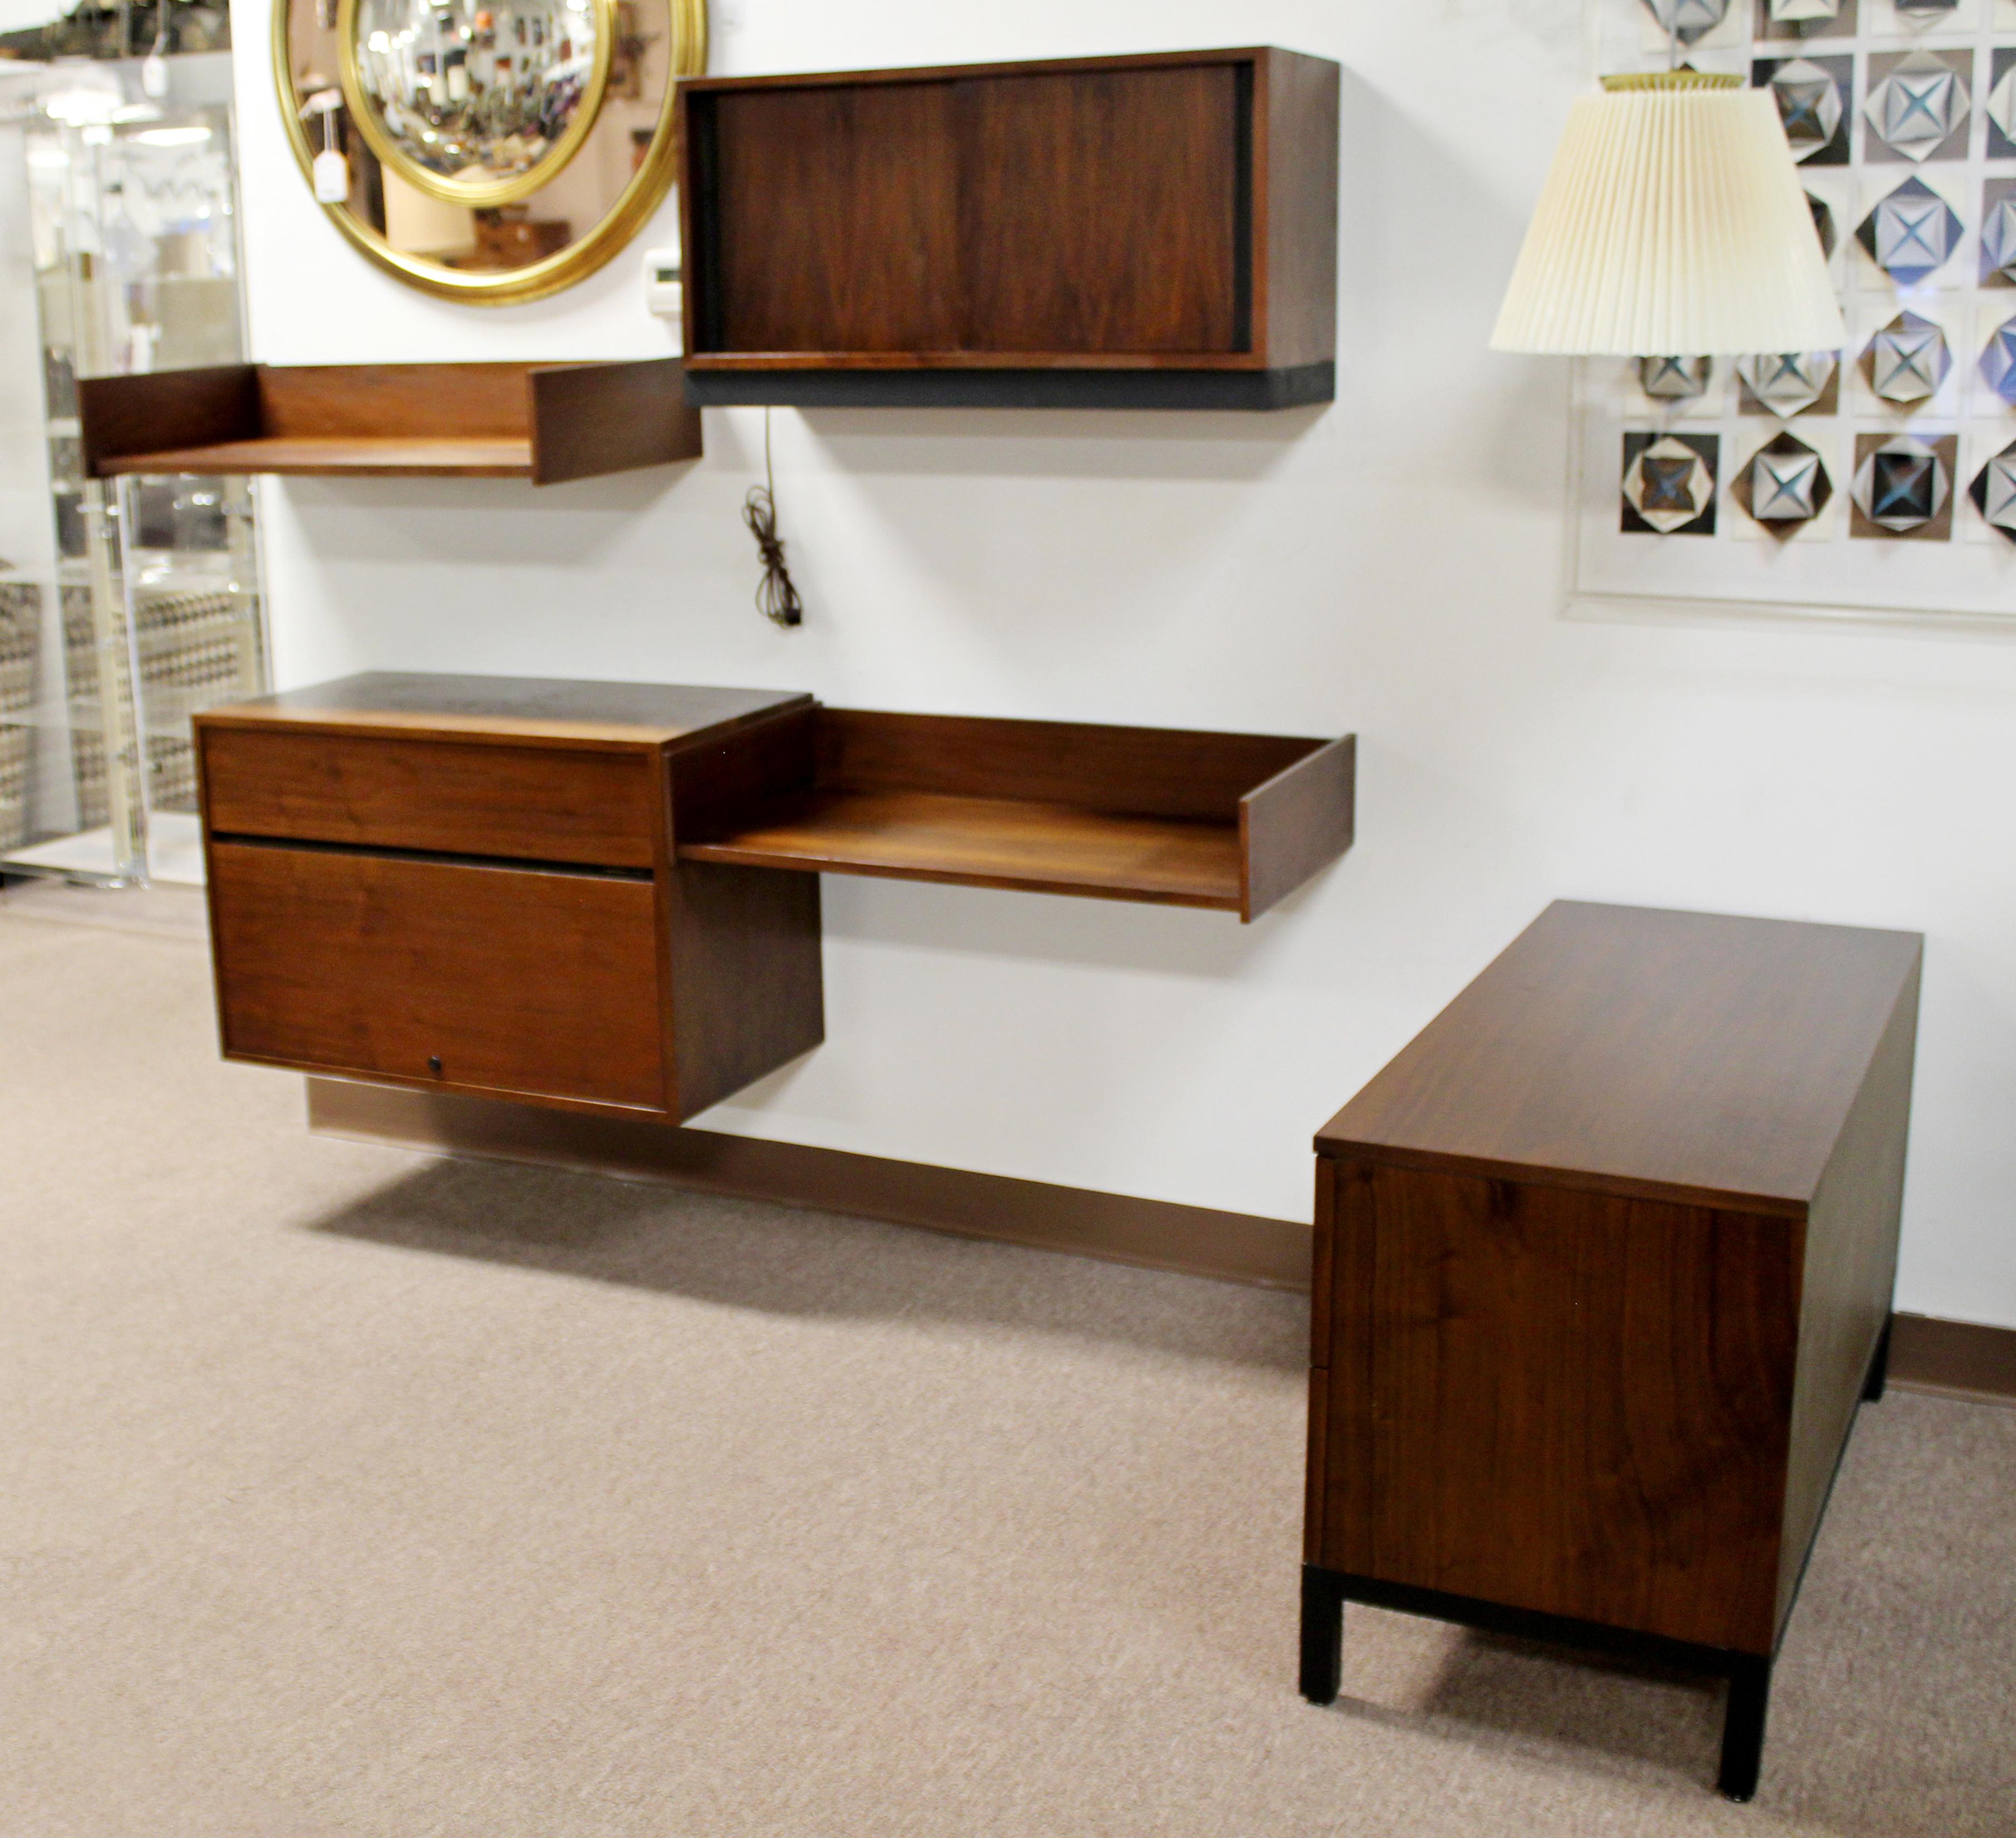 Mid-20th Century Mid-Century Modern Wall Mounted Floating Shelving Unit Desk Nelson Cadovious Era